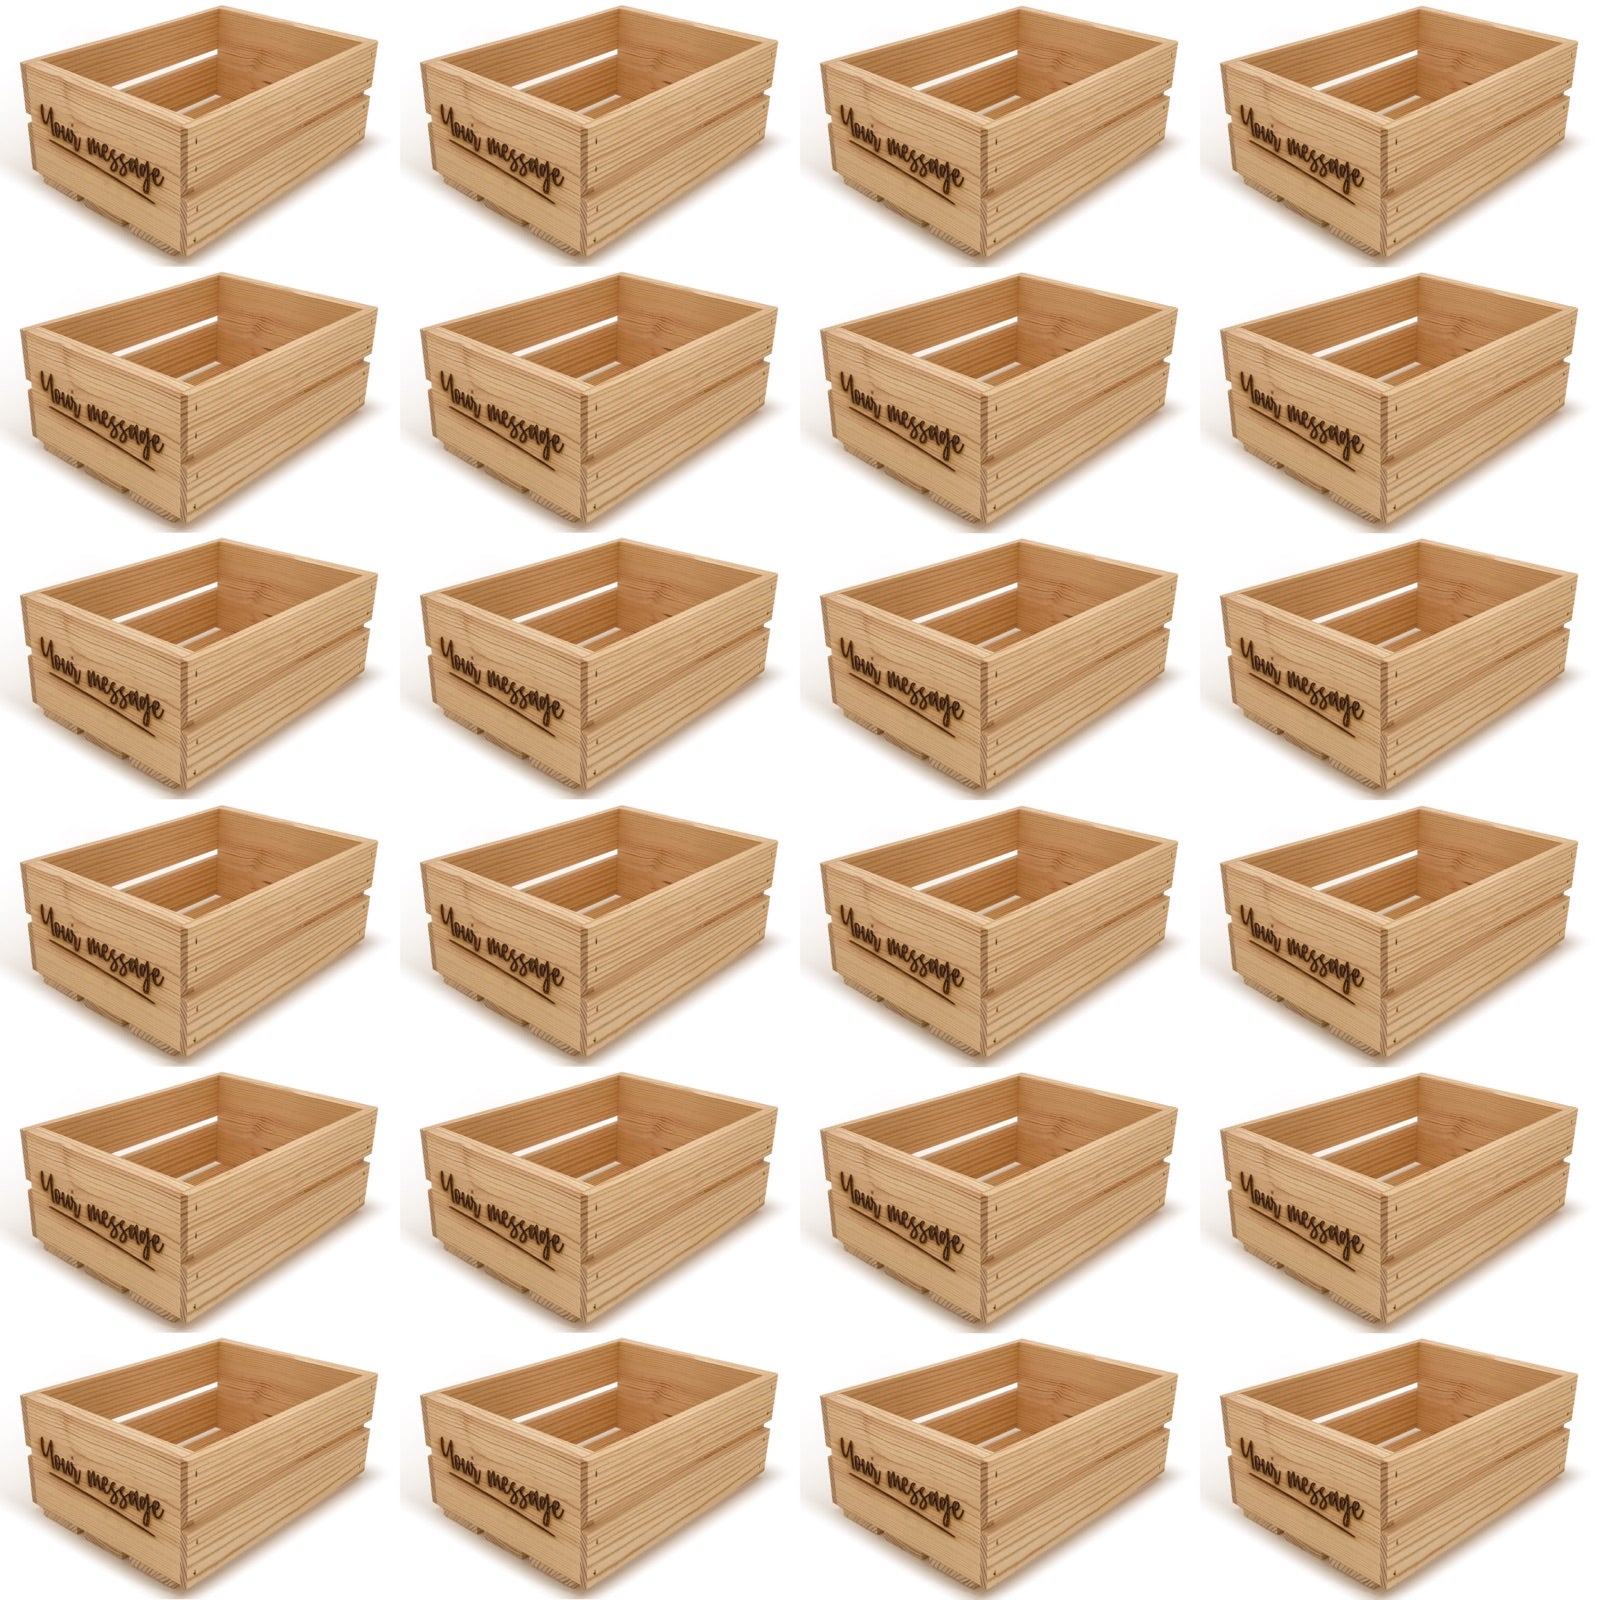 24 Small wooden crates with custom message 12x9x5.25, 6-WS-12-9-5.25-ST-NW-NL, 12-WS-12-9-5.25-ST-NW-NL, 24-WS-12-9-5.25-ST-NW-NL, 48-WS-12-9-5.25-ST-NW-NL, 96-WS-12-9-5.25-ST-NW-NL